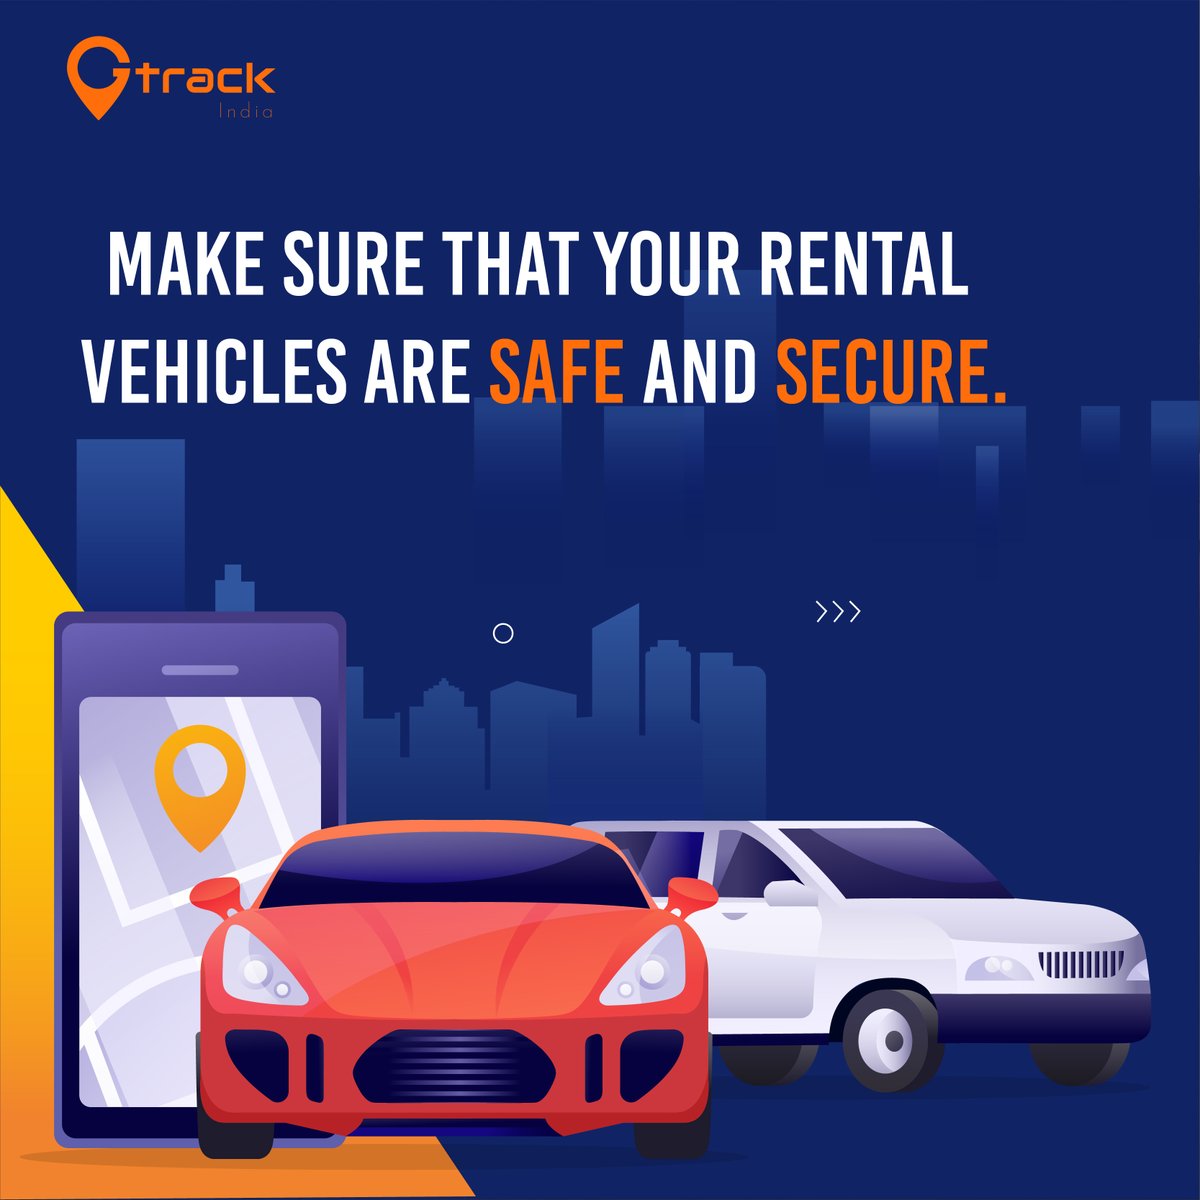 Relax and be carefree knowing that your vehicles are equipped with Gtrack's device. Geo-fencing and immobilizer feature will protect your vehicle from being stolen.

#GTrack #India #trucking #logistics #supplychain #transportation #car #cartracking #bike